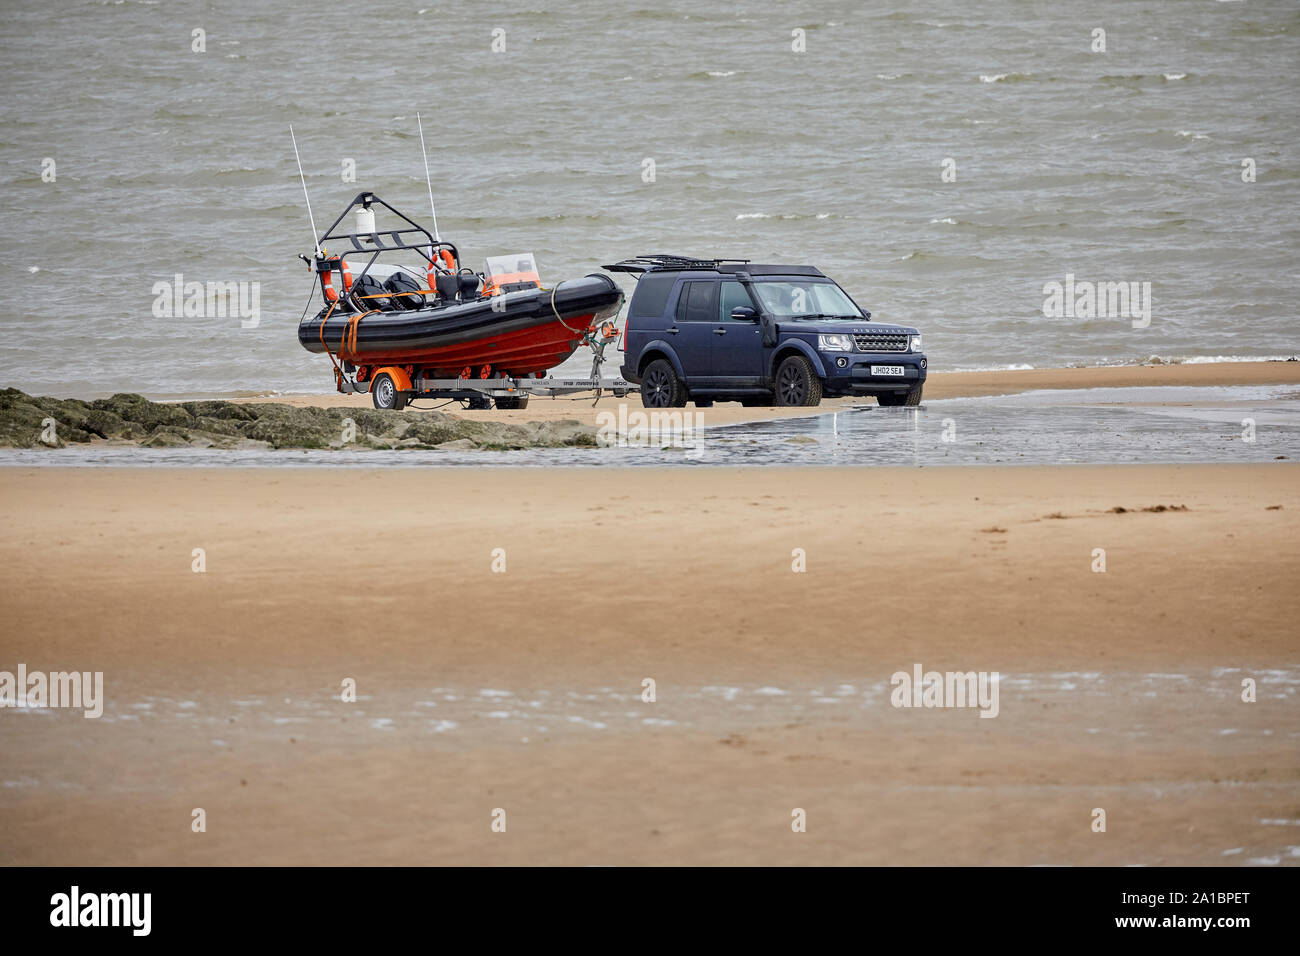 A Land Rover Discovery hooked up to a  speed boat no the sand at New Brighton waterfront beach Stock Photo